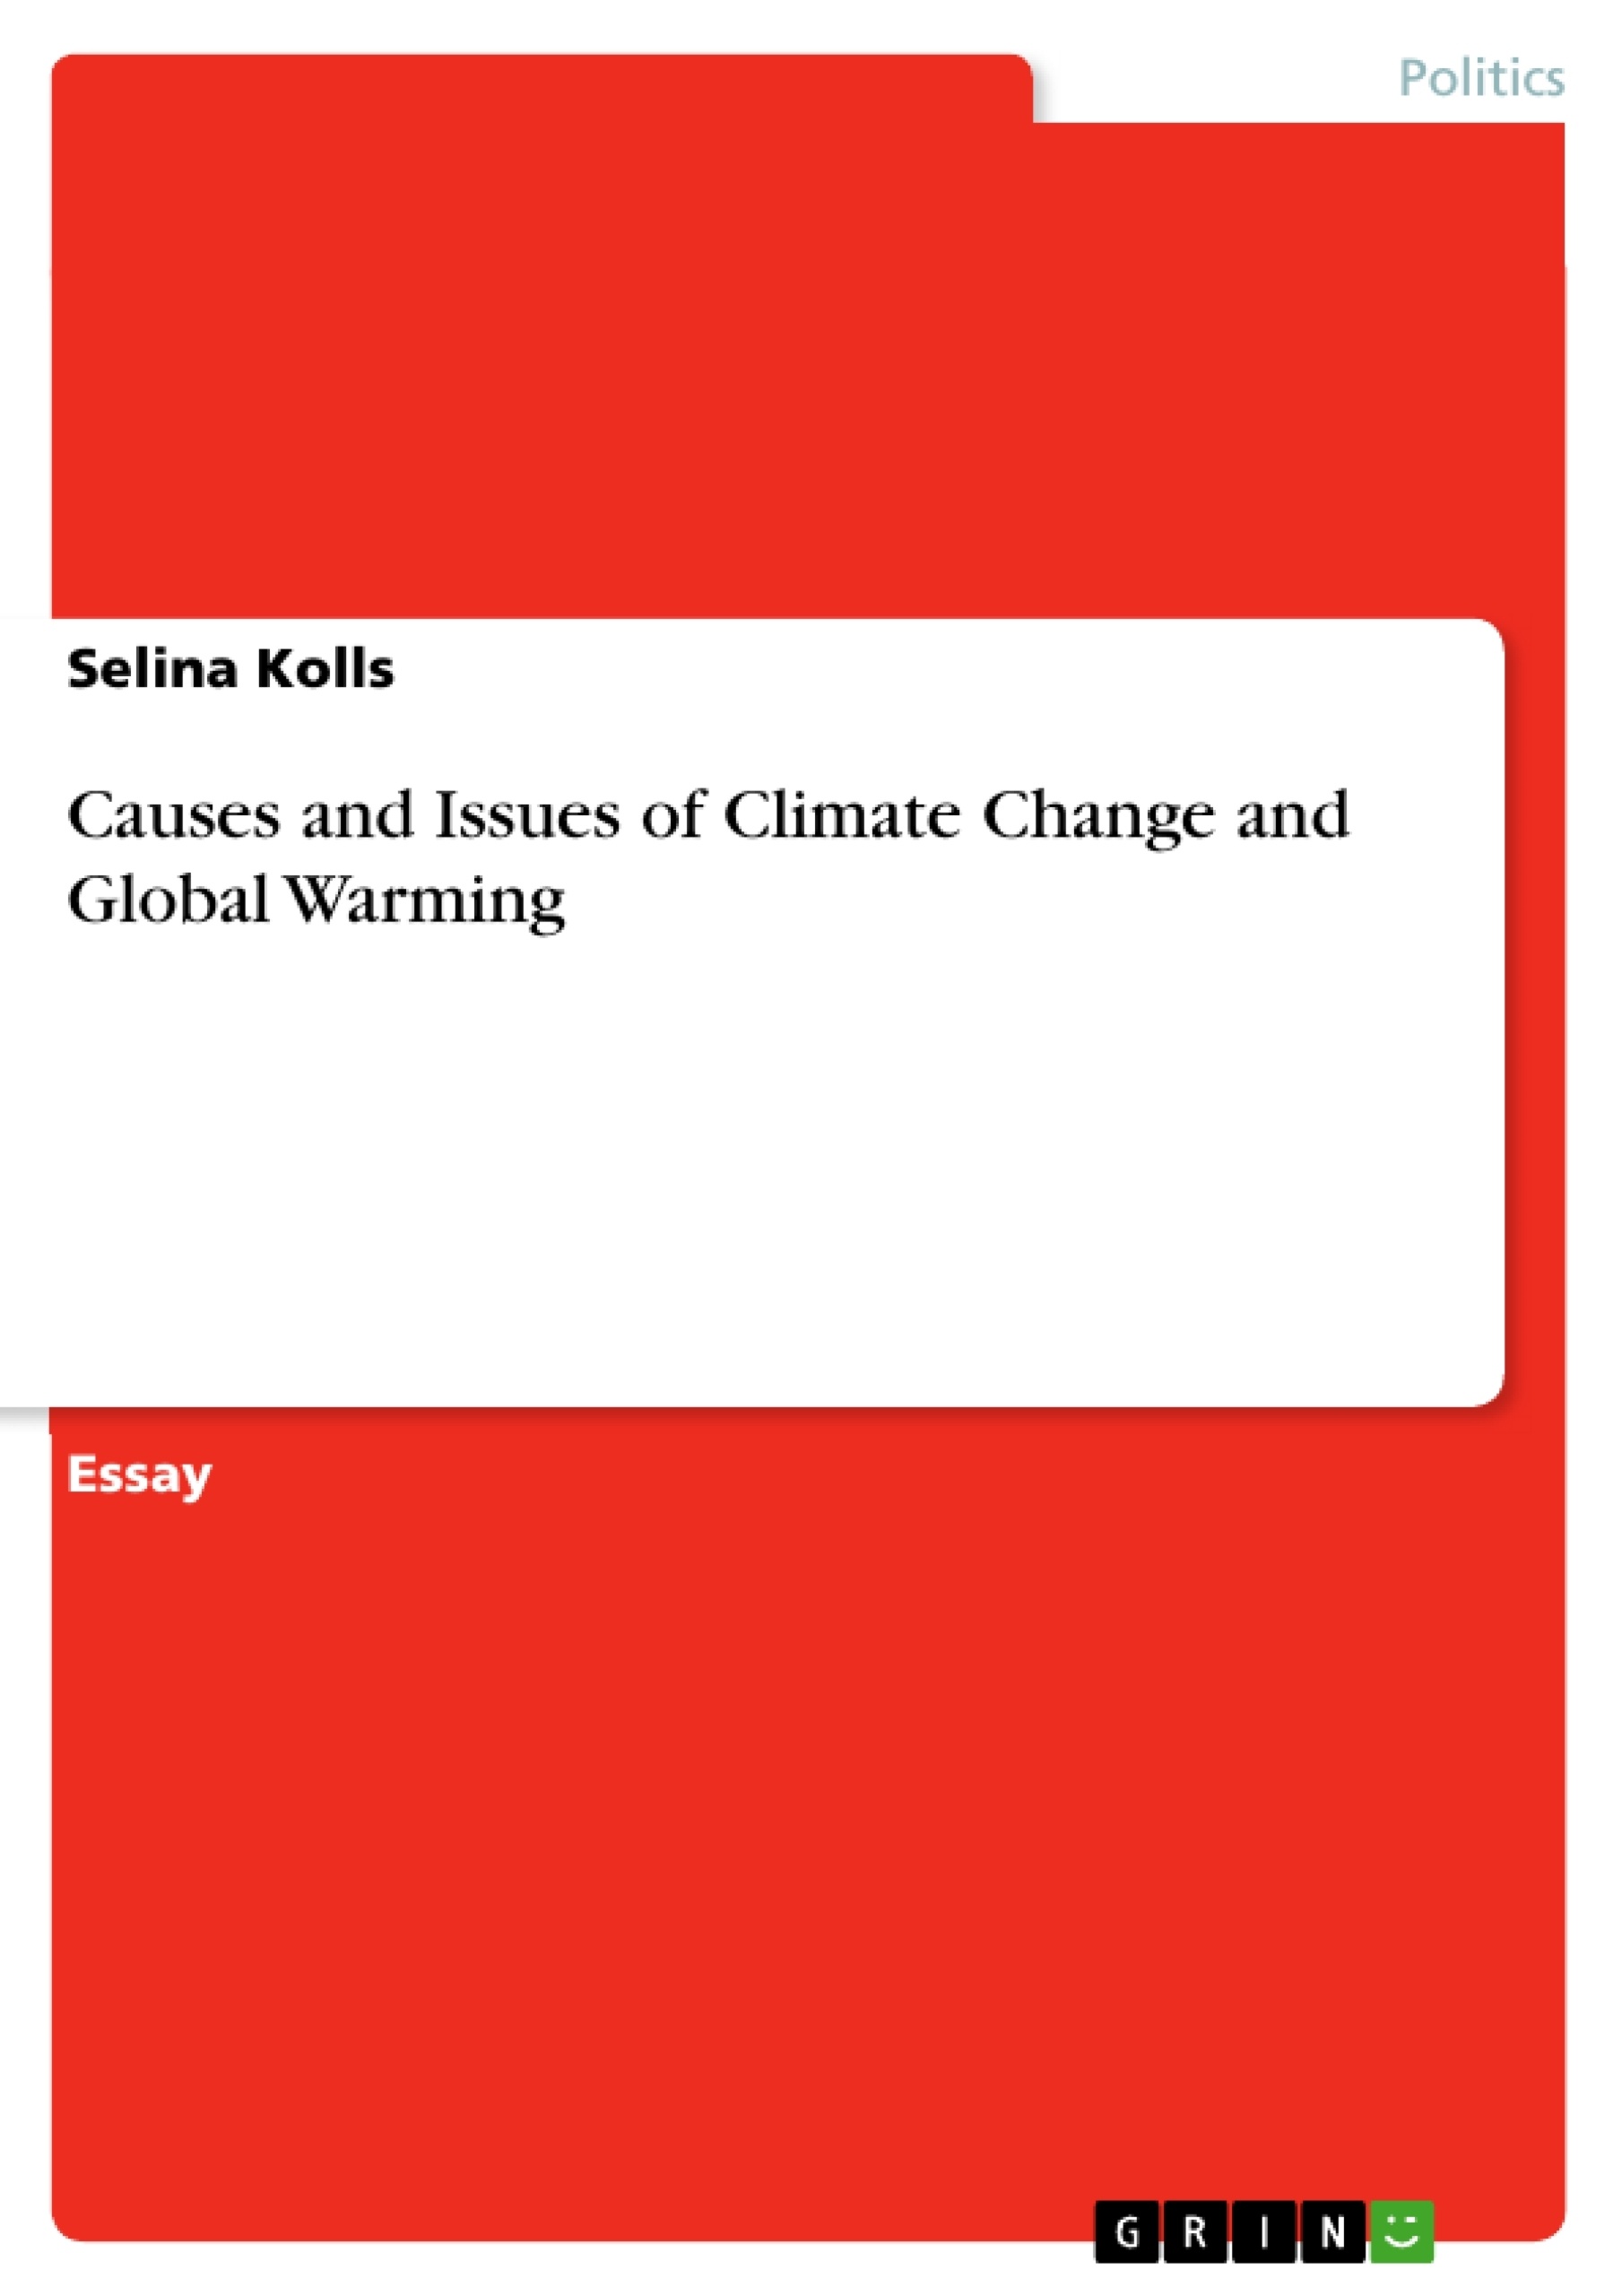 Titel: Causes and Issues of Climate Change and Global Warming